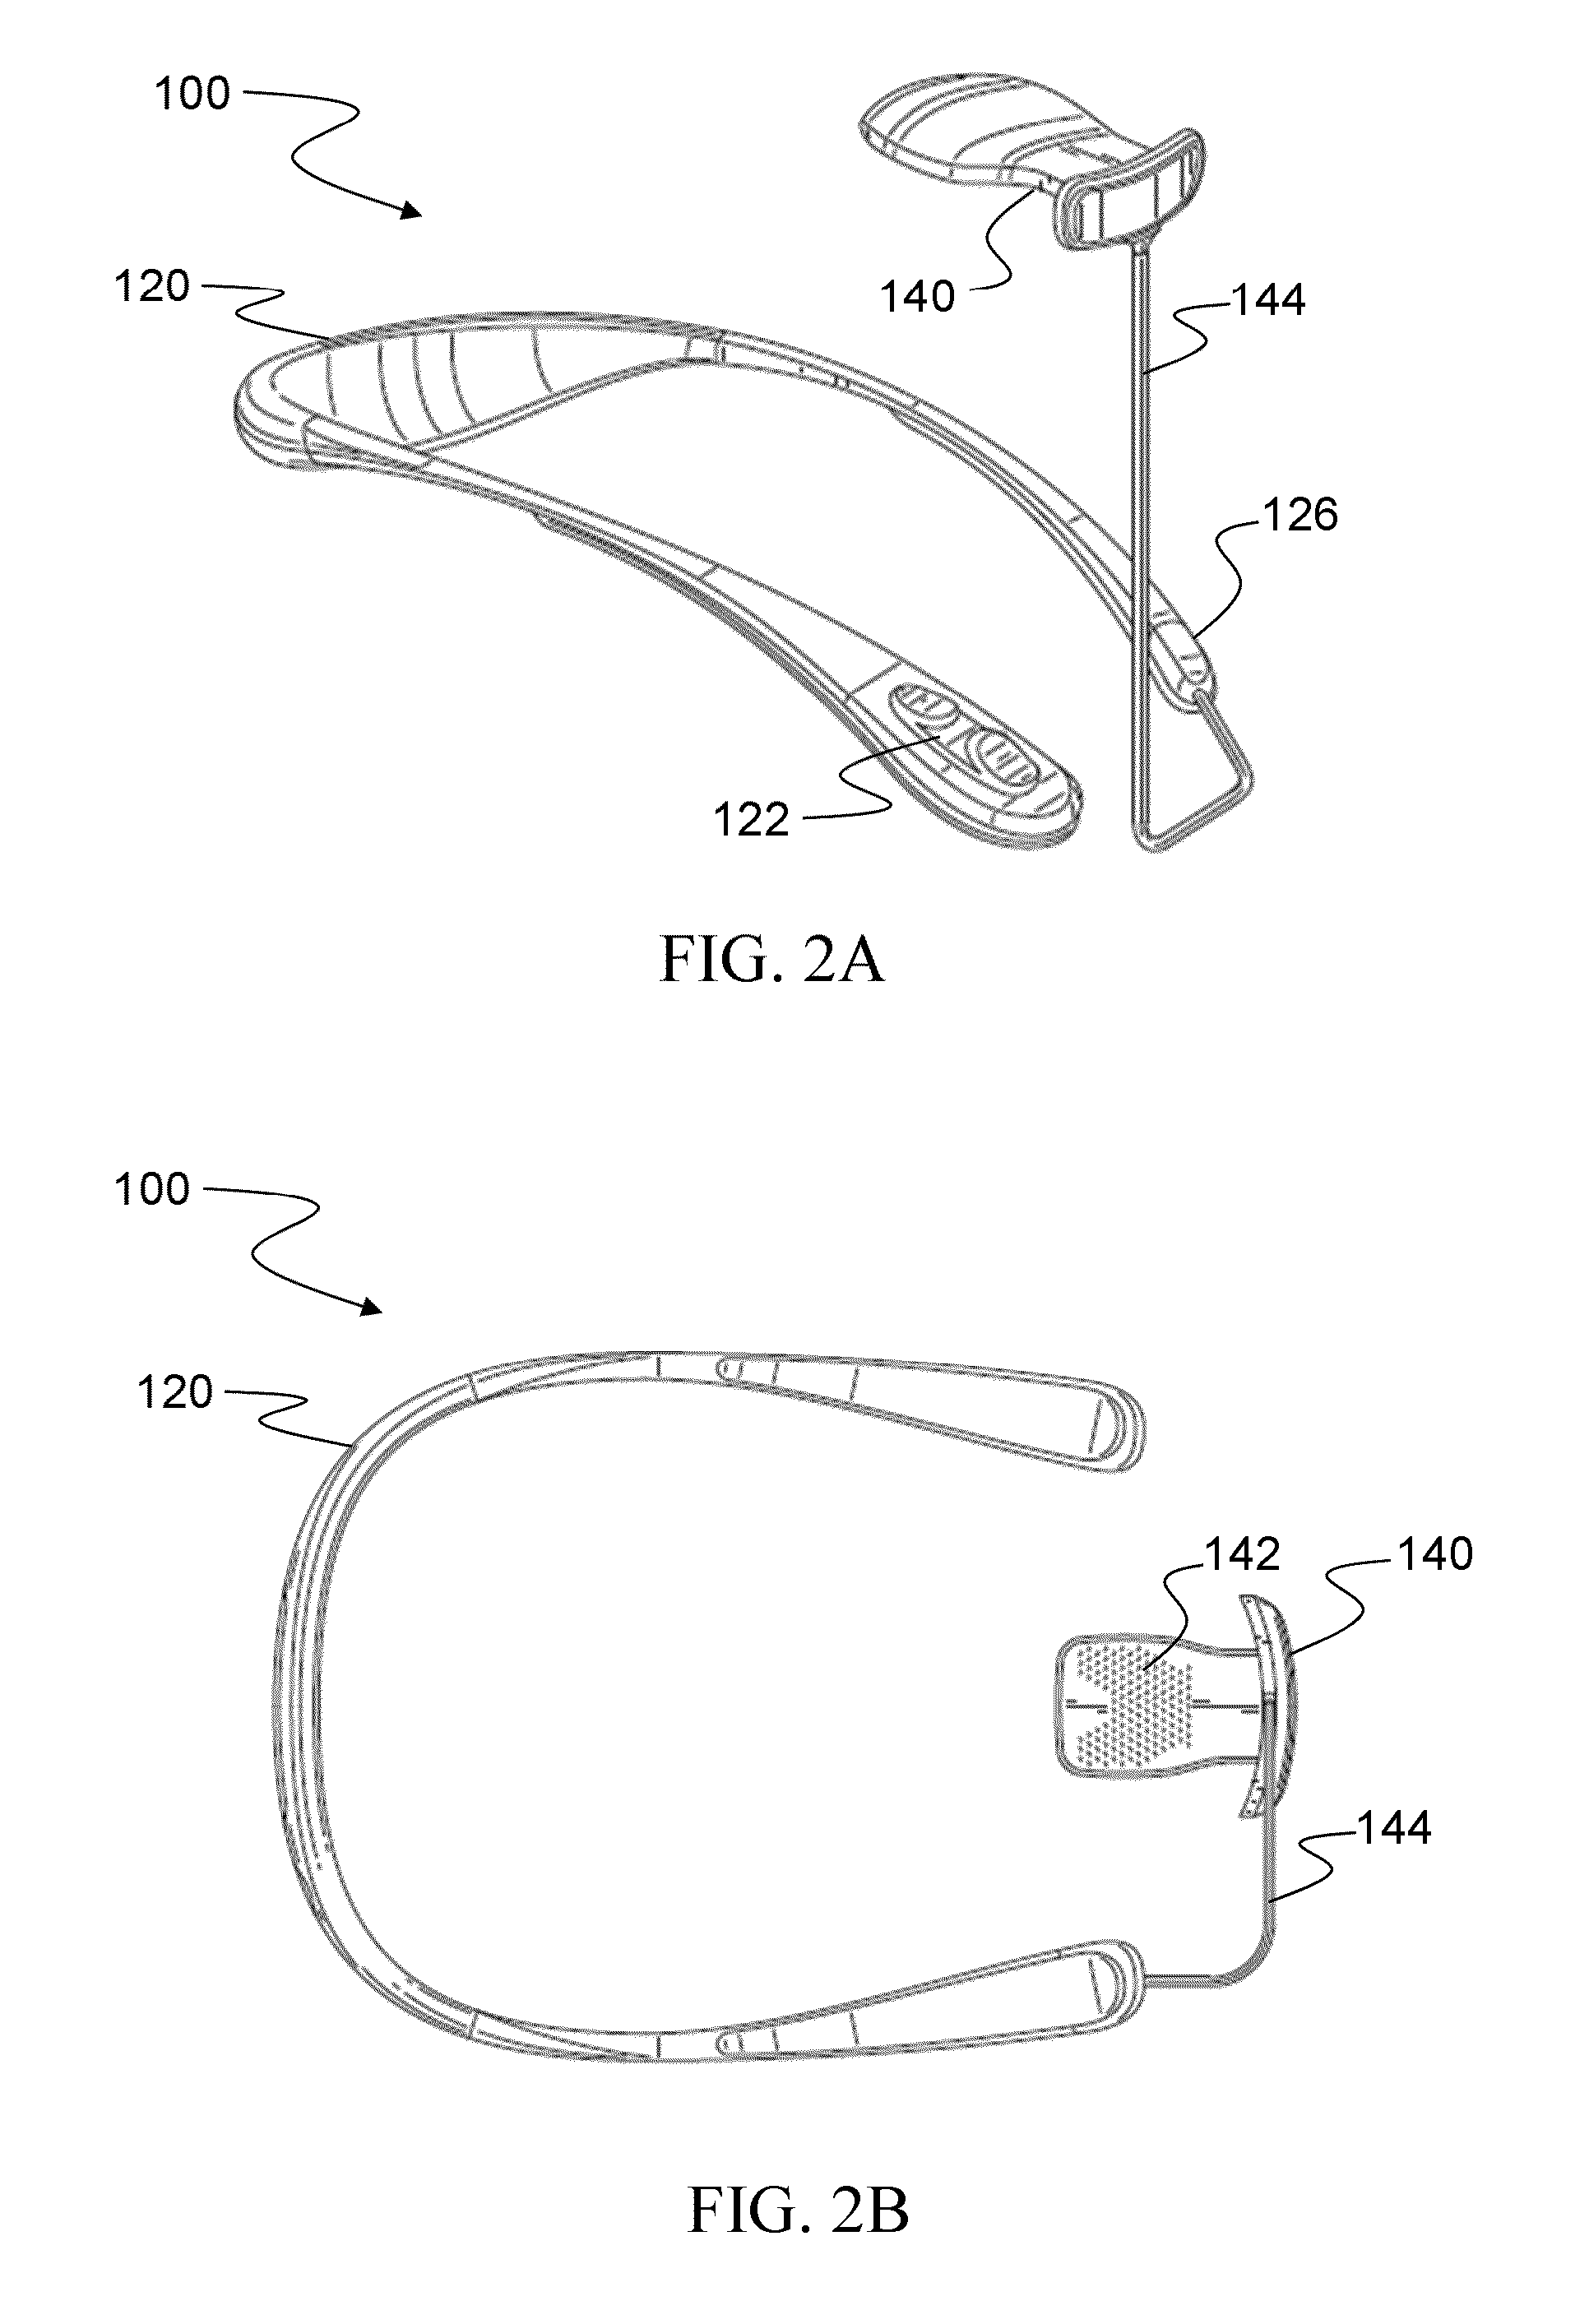 Methods of manufacturing devices for the neurorehabilitation of a patient